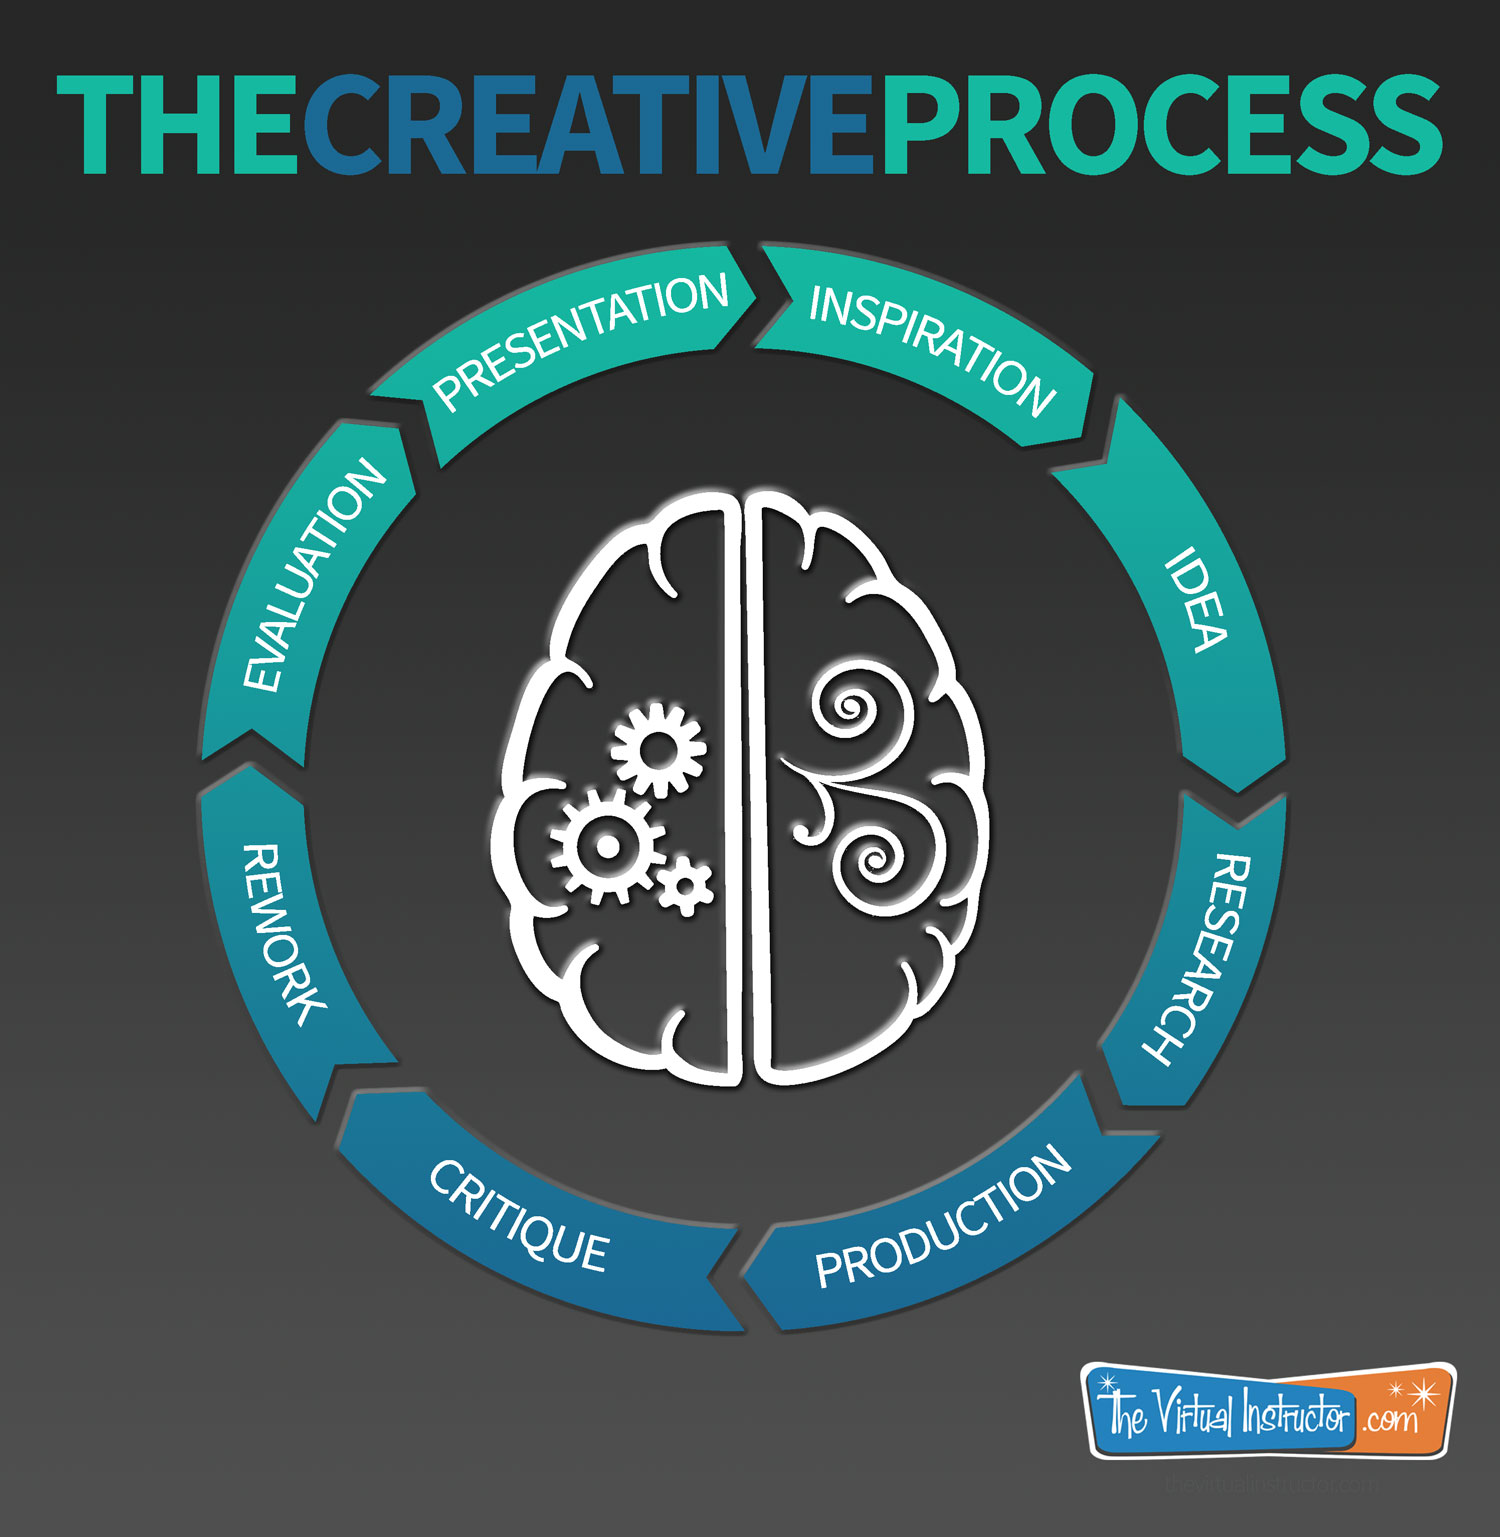 The Creative Process - Infographic